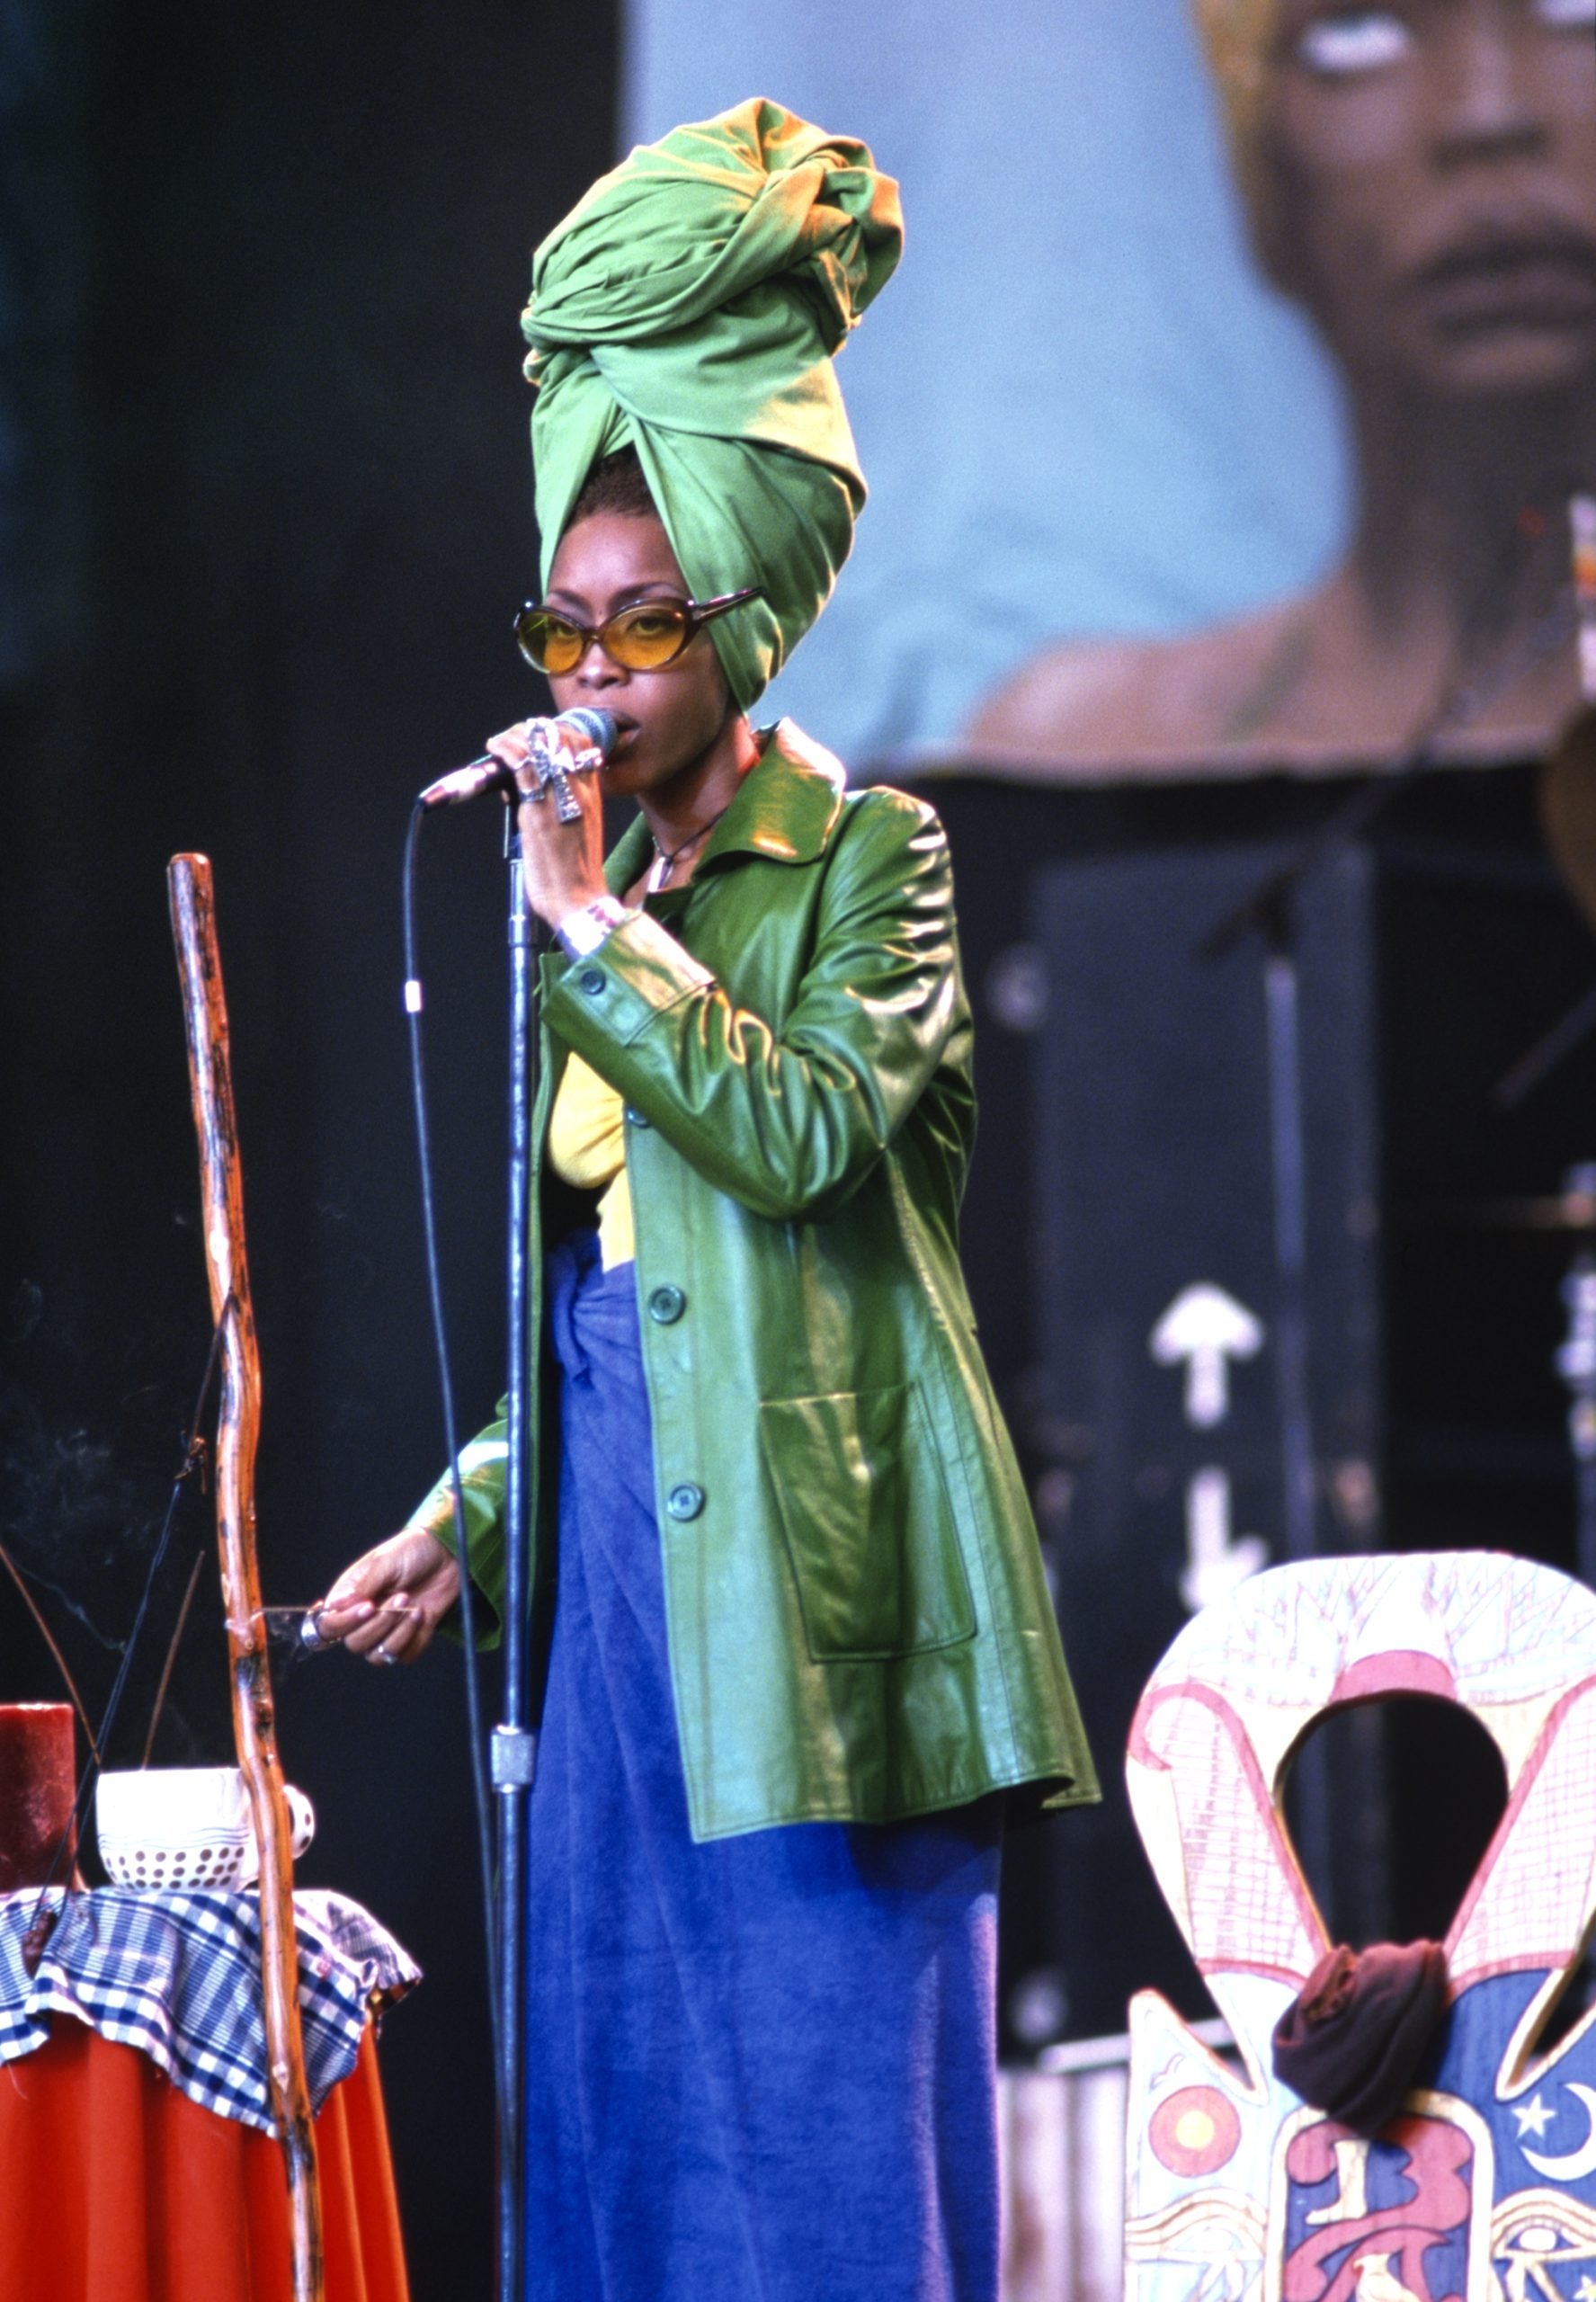 Channeling Nostalgia With This Celebrity Look: Erykah Badu